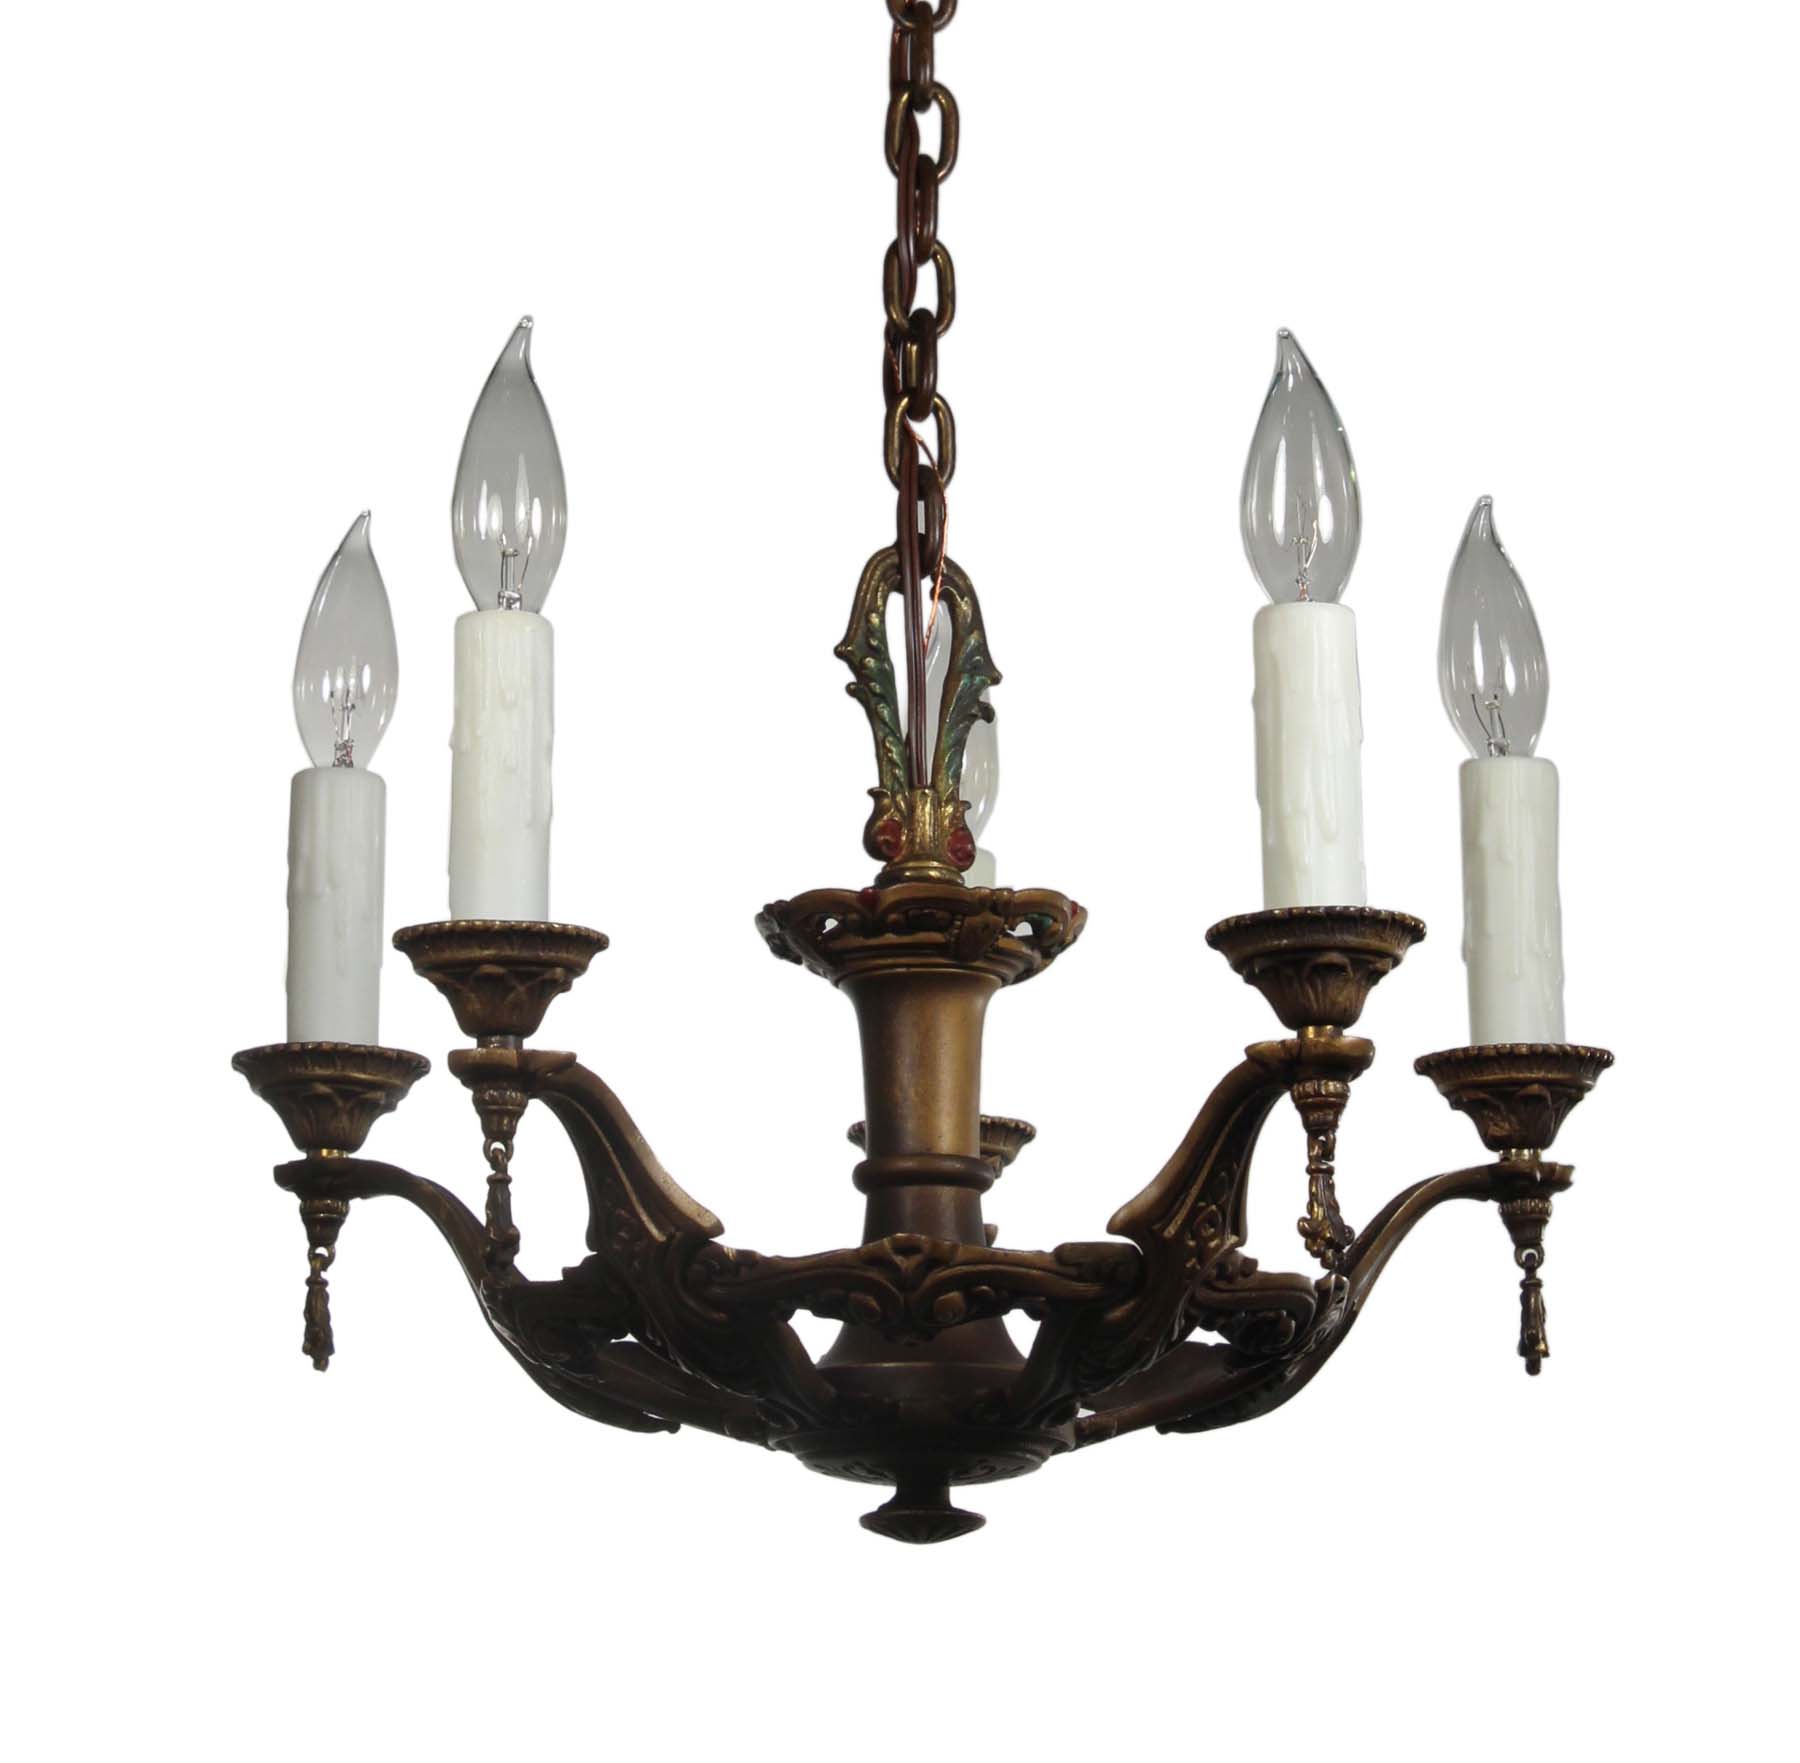 SOLD Antique Chandelier with Original Polychrome Finish, Signed Radiant-0